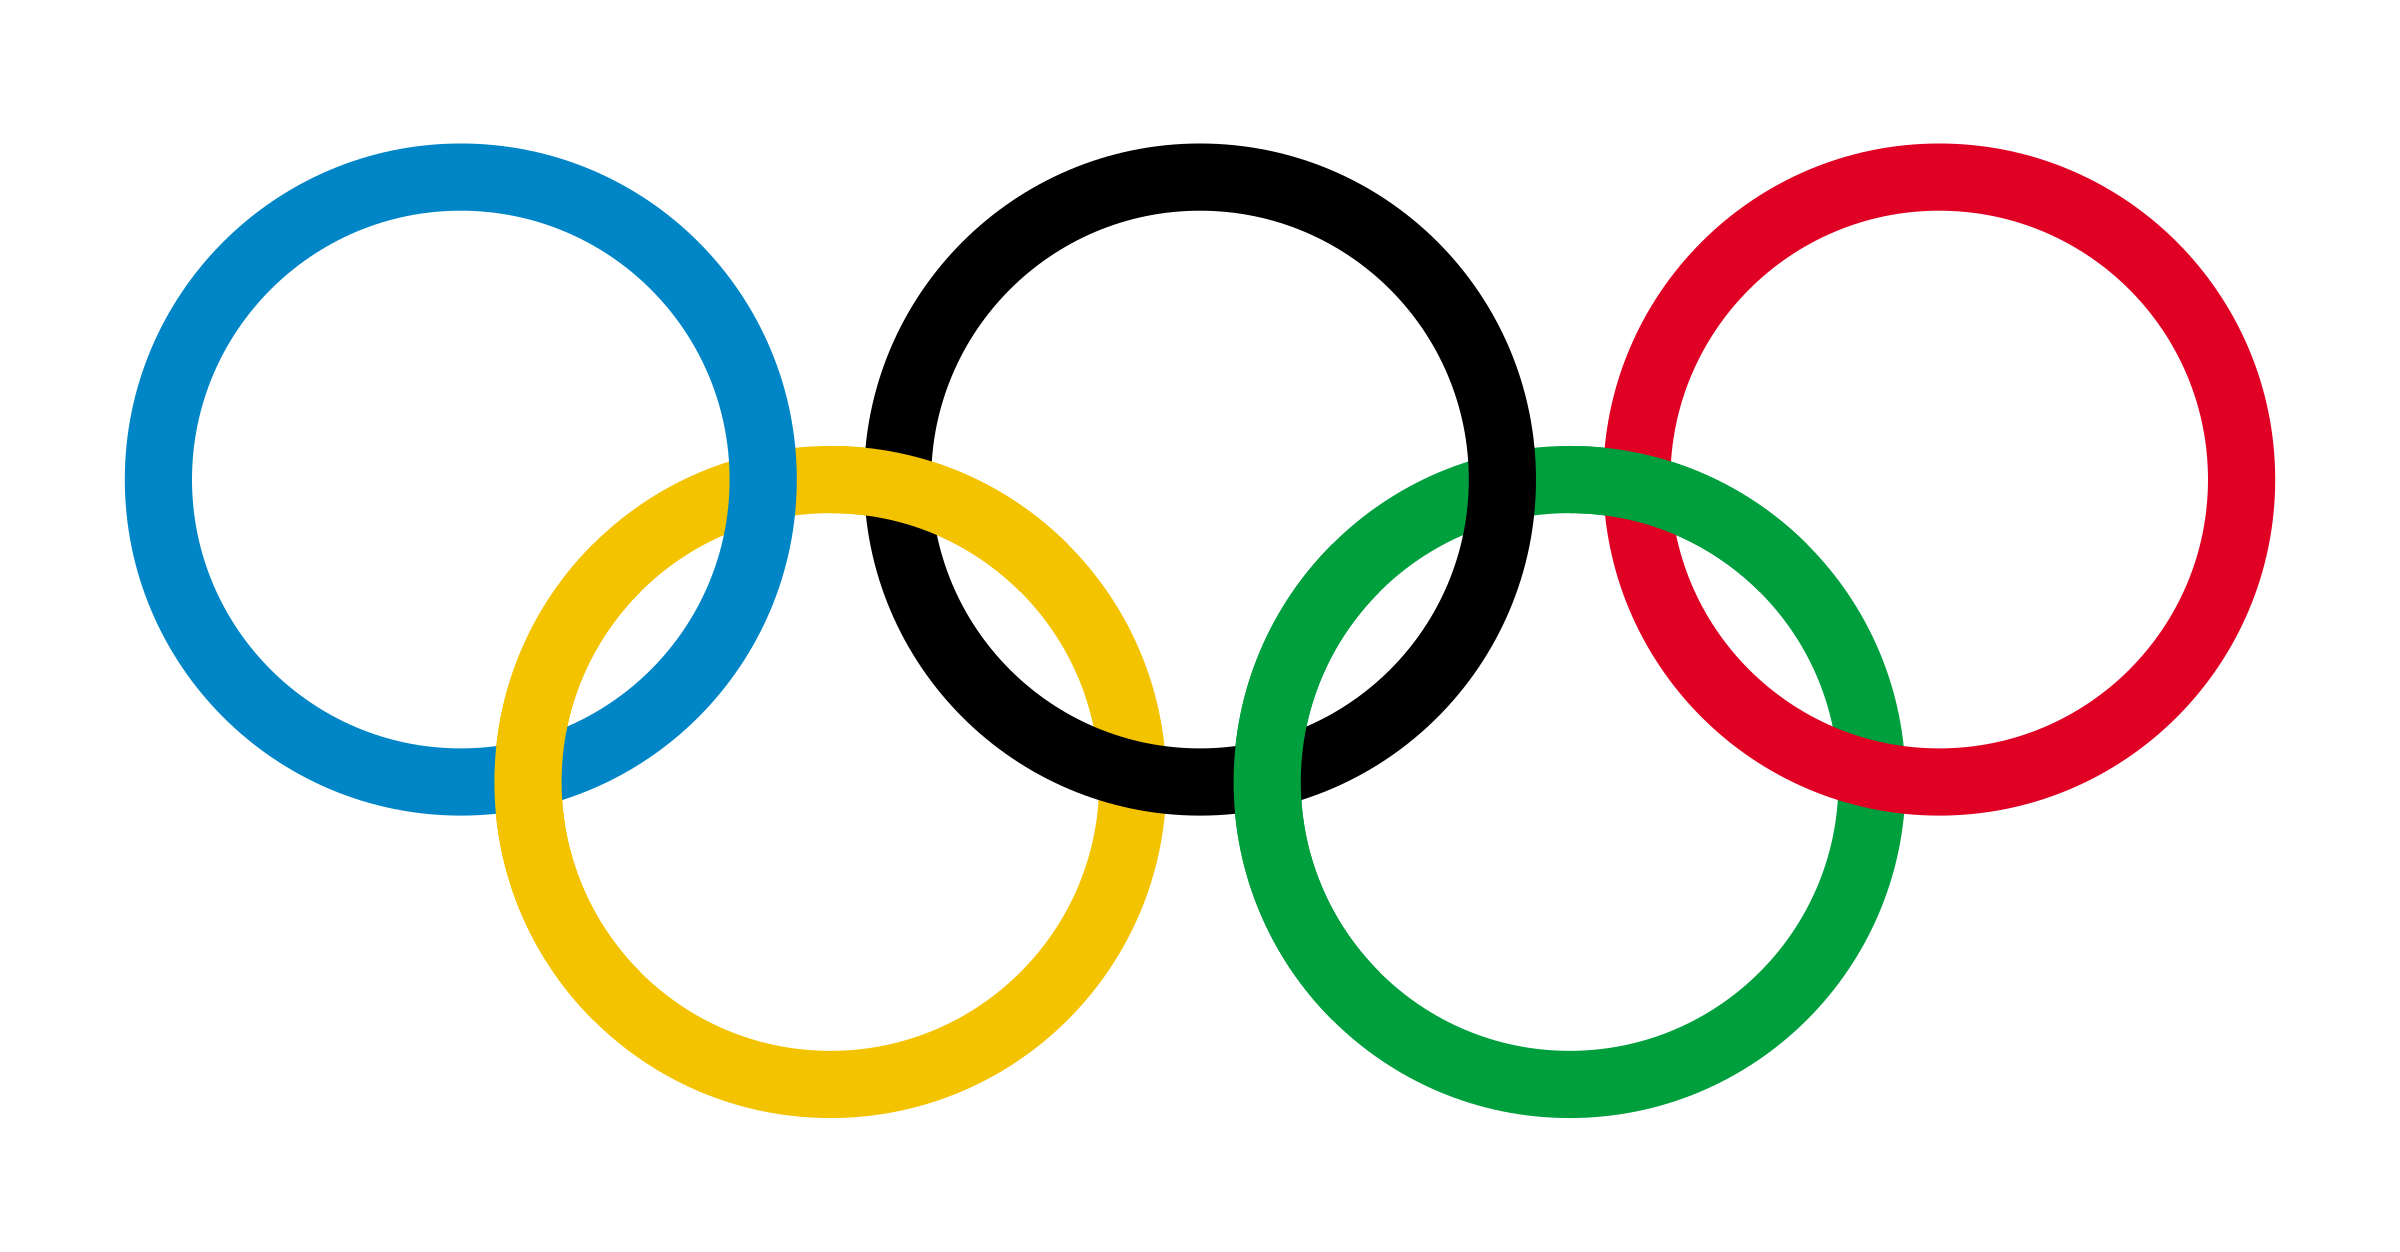 Big image png. Olympic clipart olympic rings